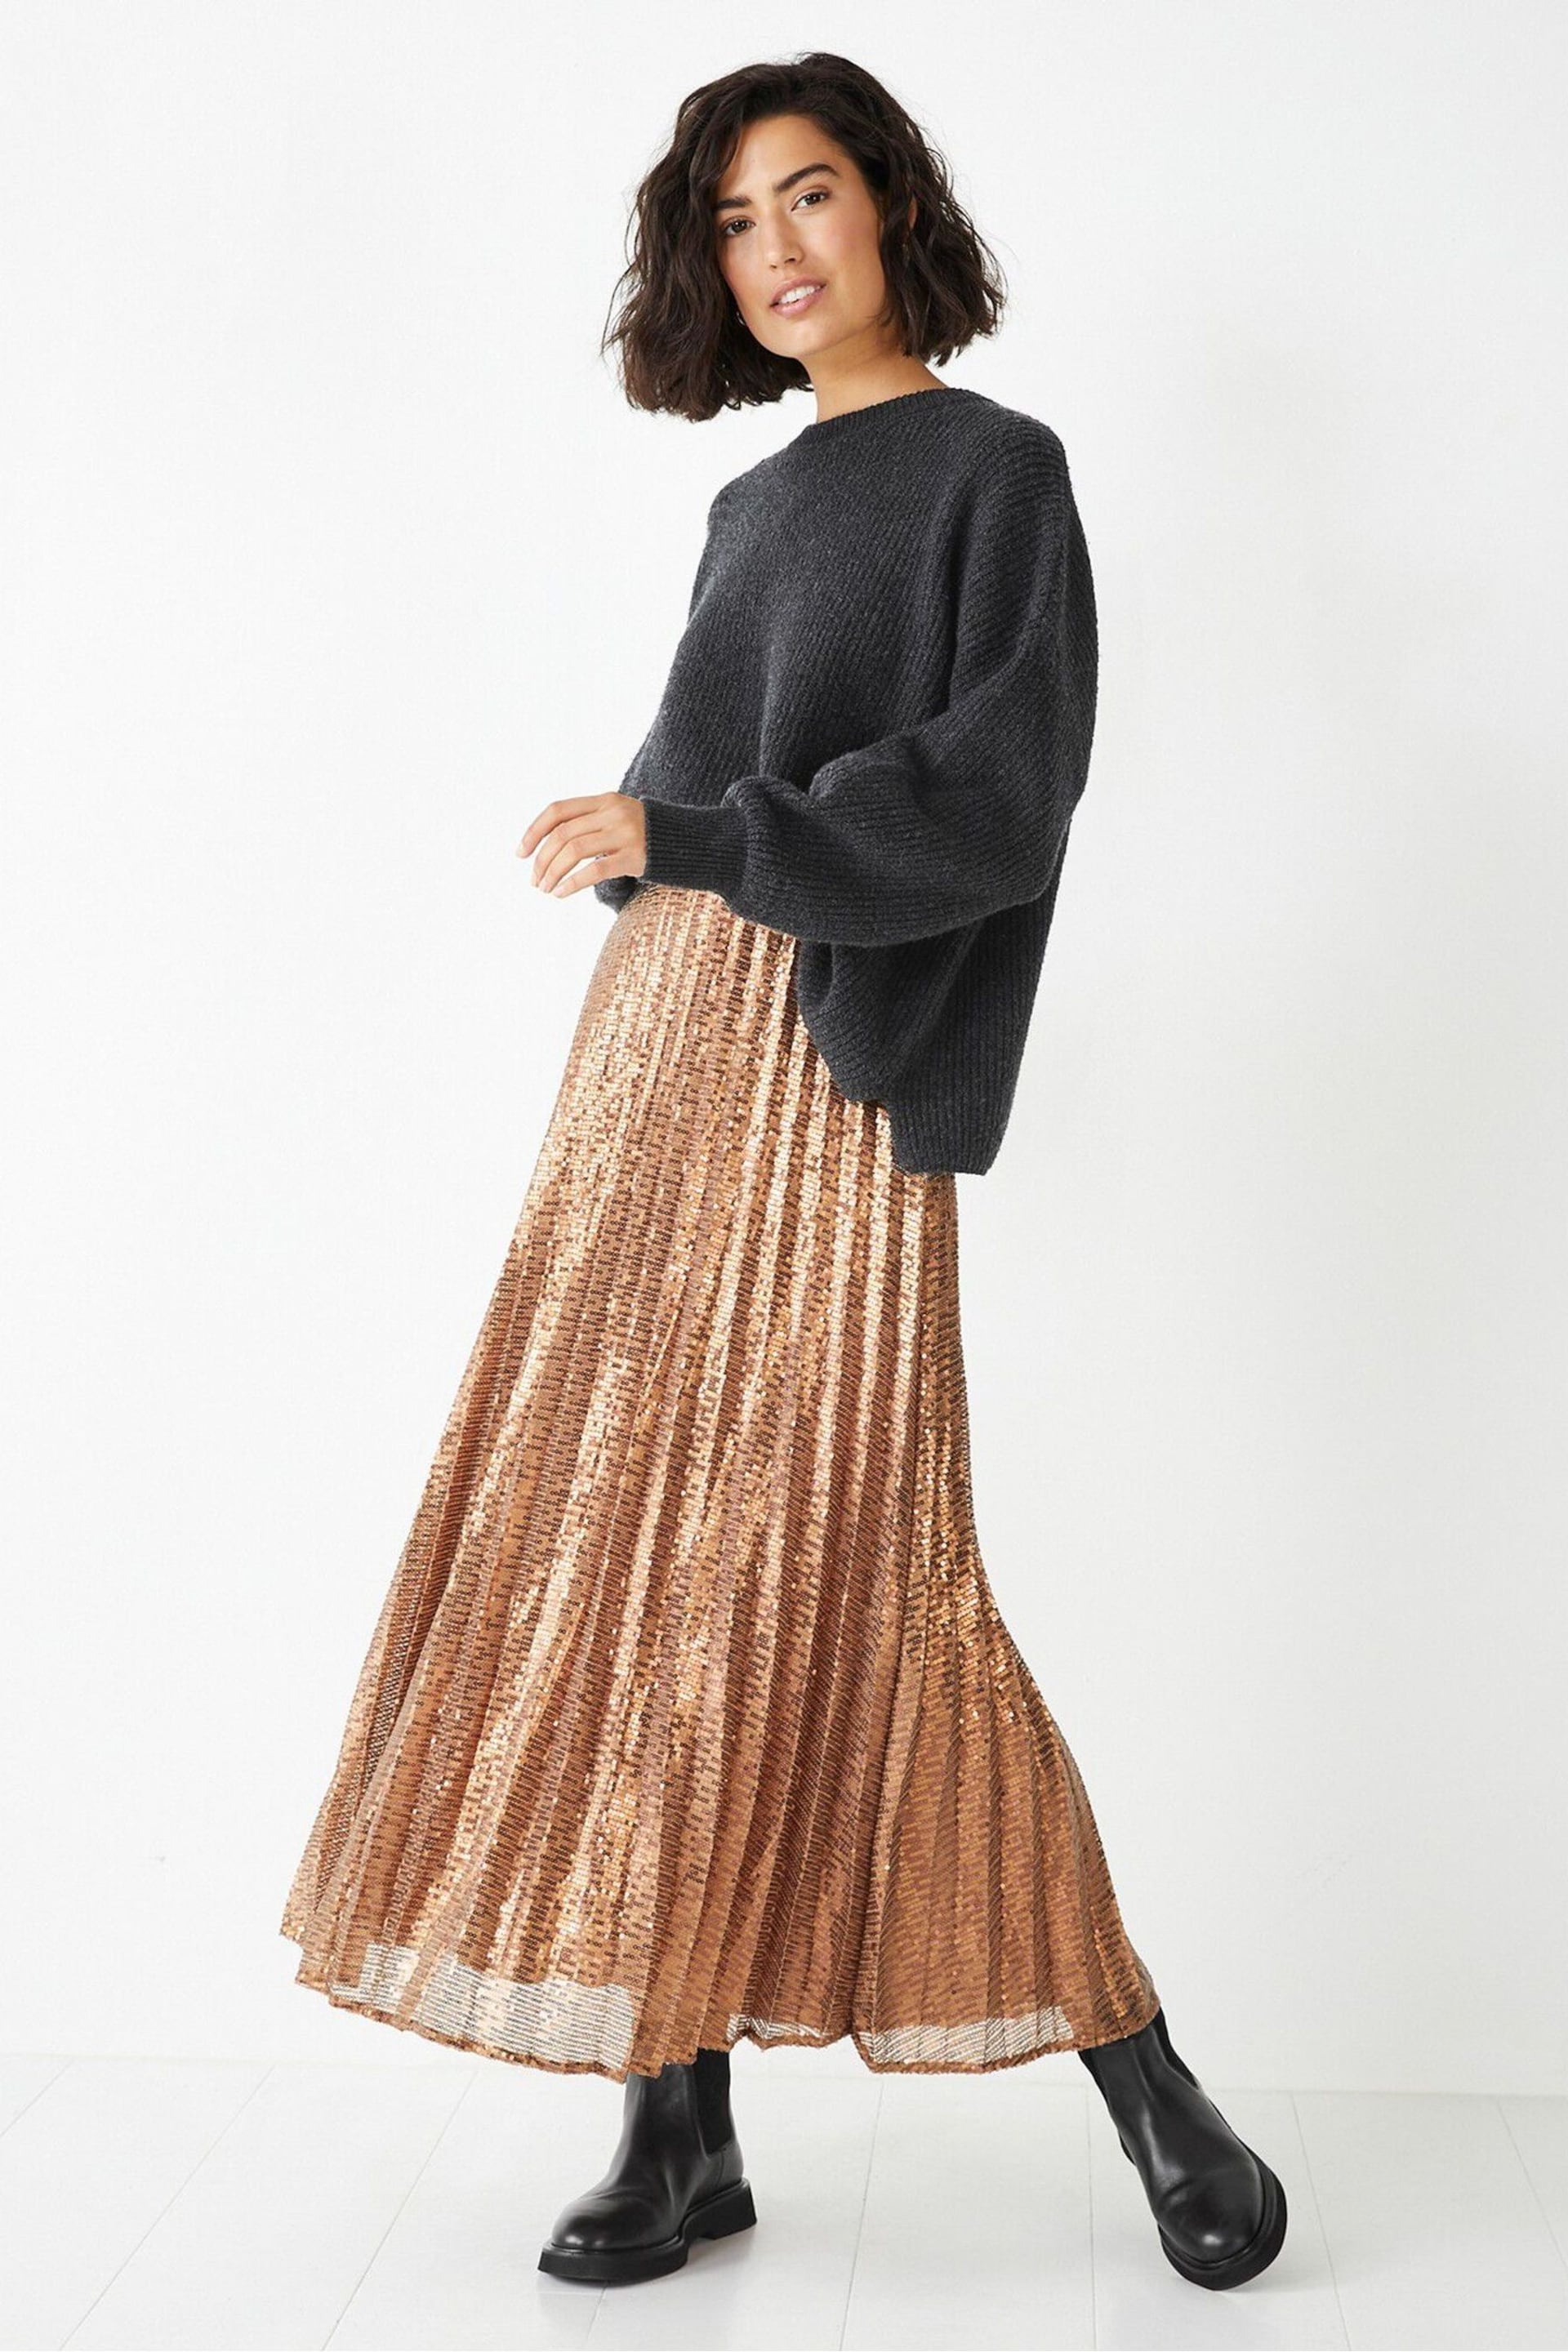 Hush Gold Clio Pleated Sequin Skirt - Image 1 of 5